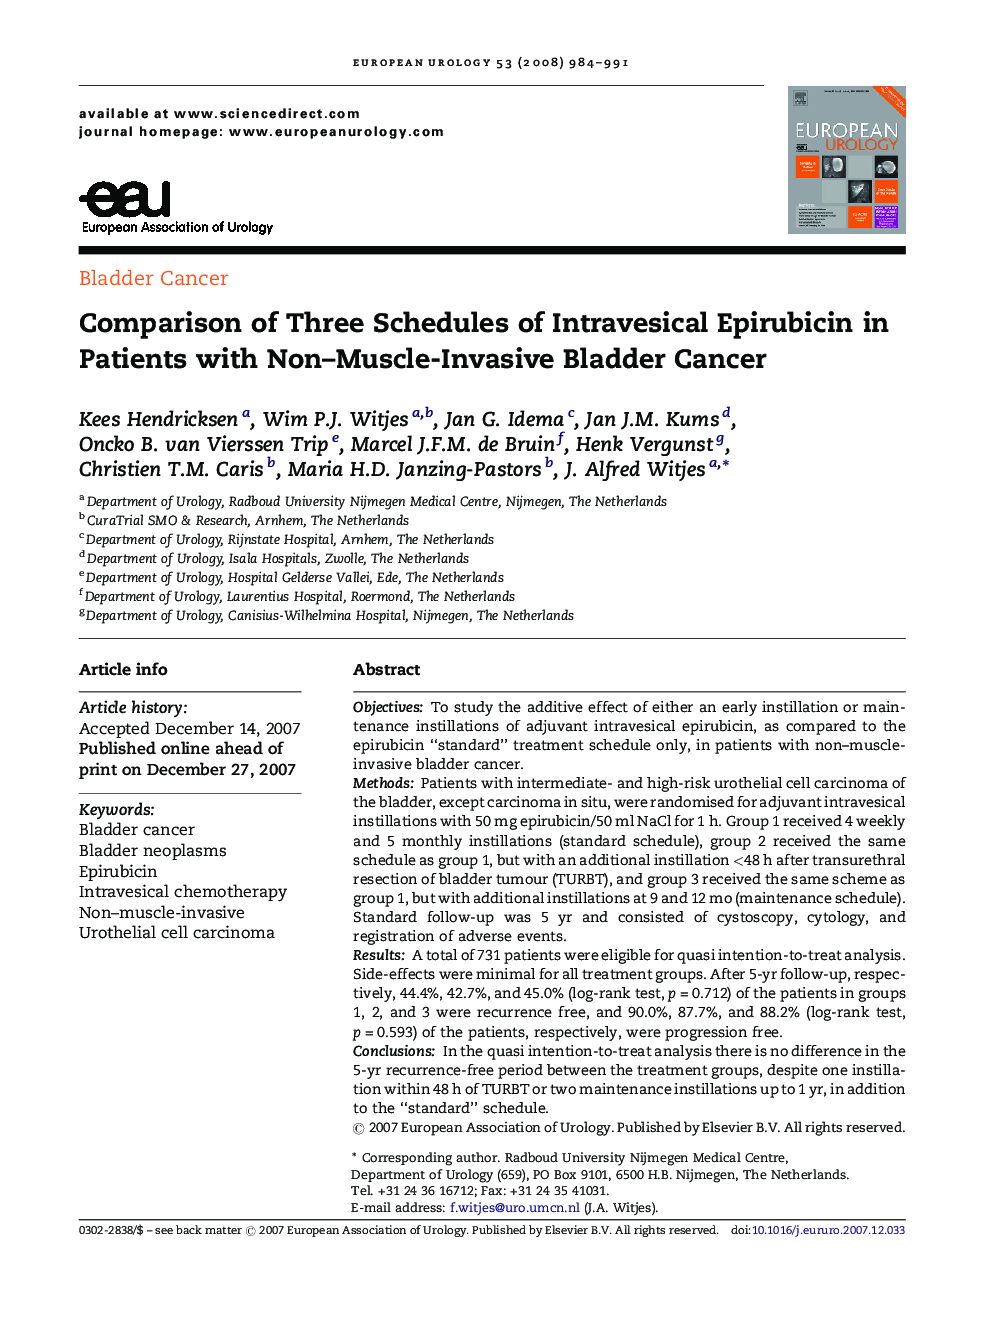 Comparison of Three Schedules of Intravesical Epirubicin in Patients with Non–Muscle-Invasive Bladder Cancer